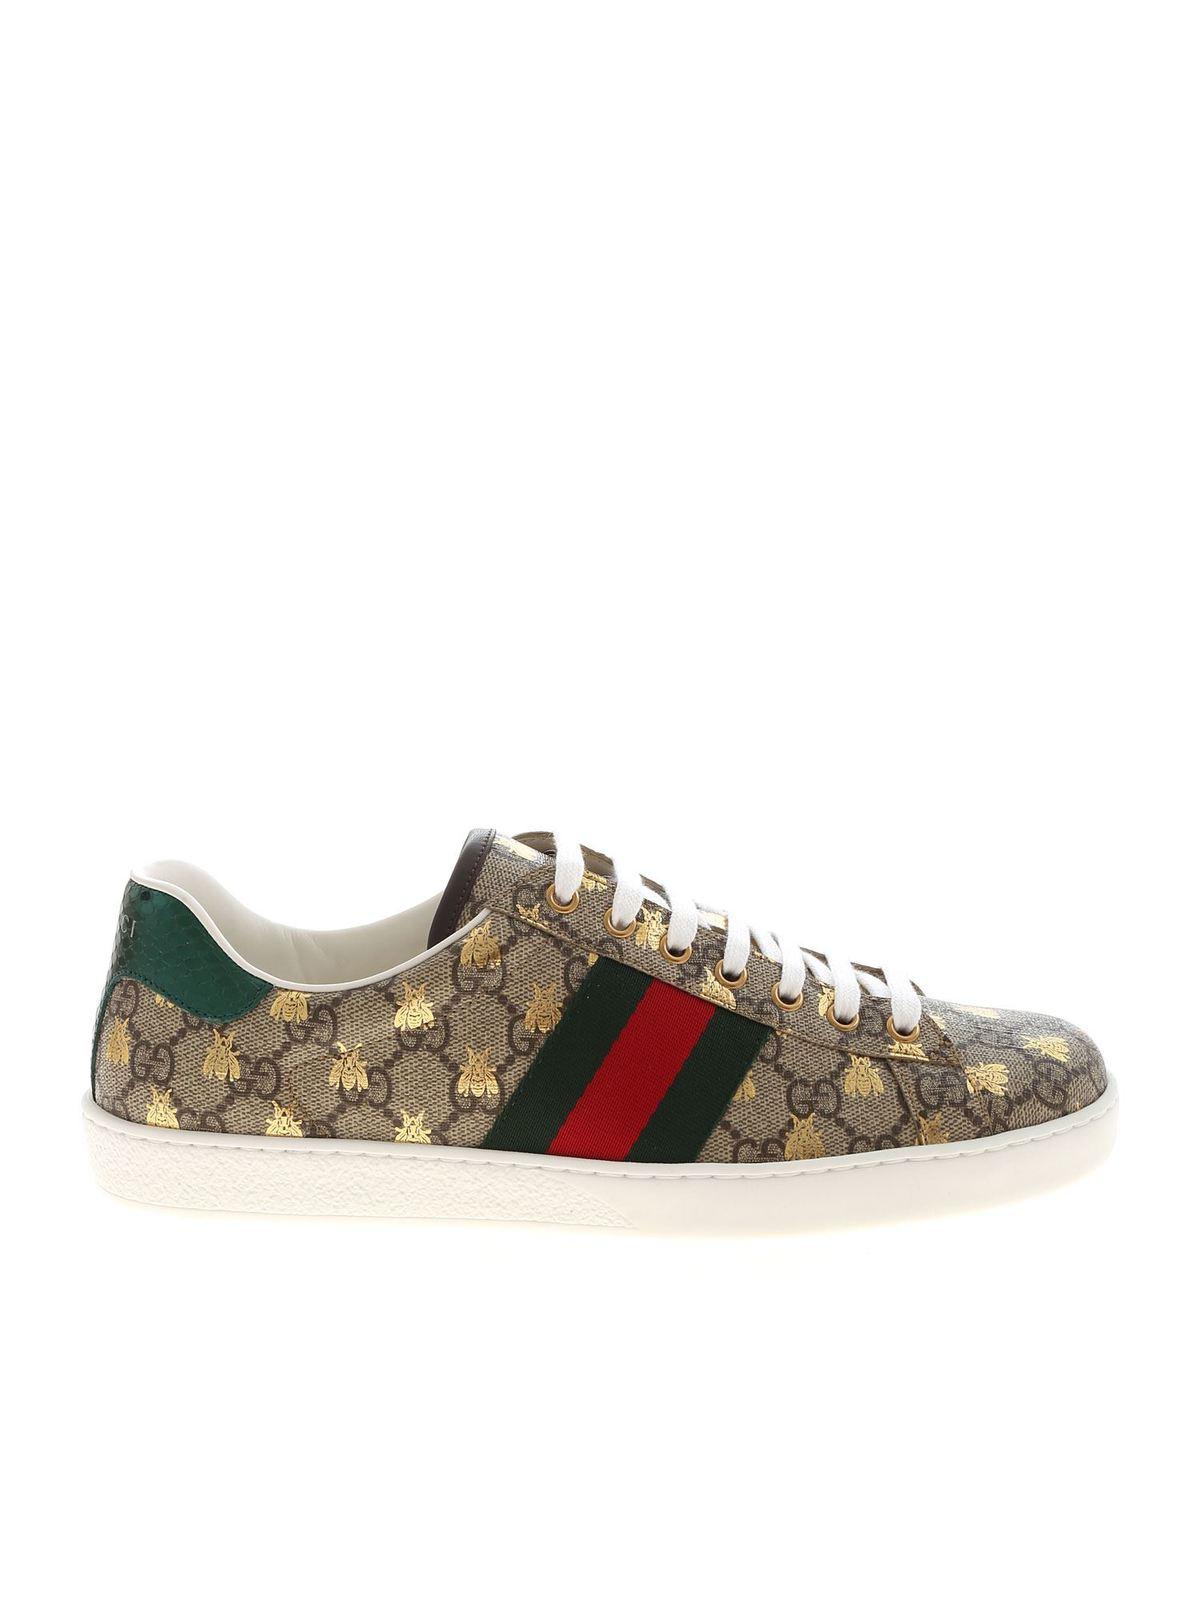 gucci bumblebee trainers